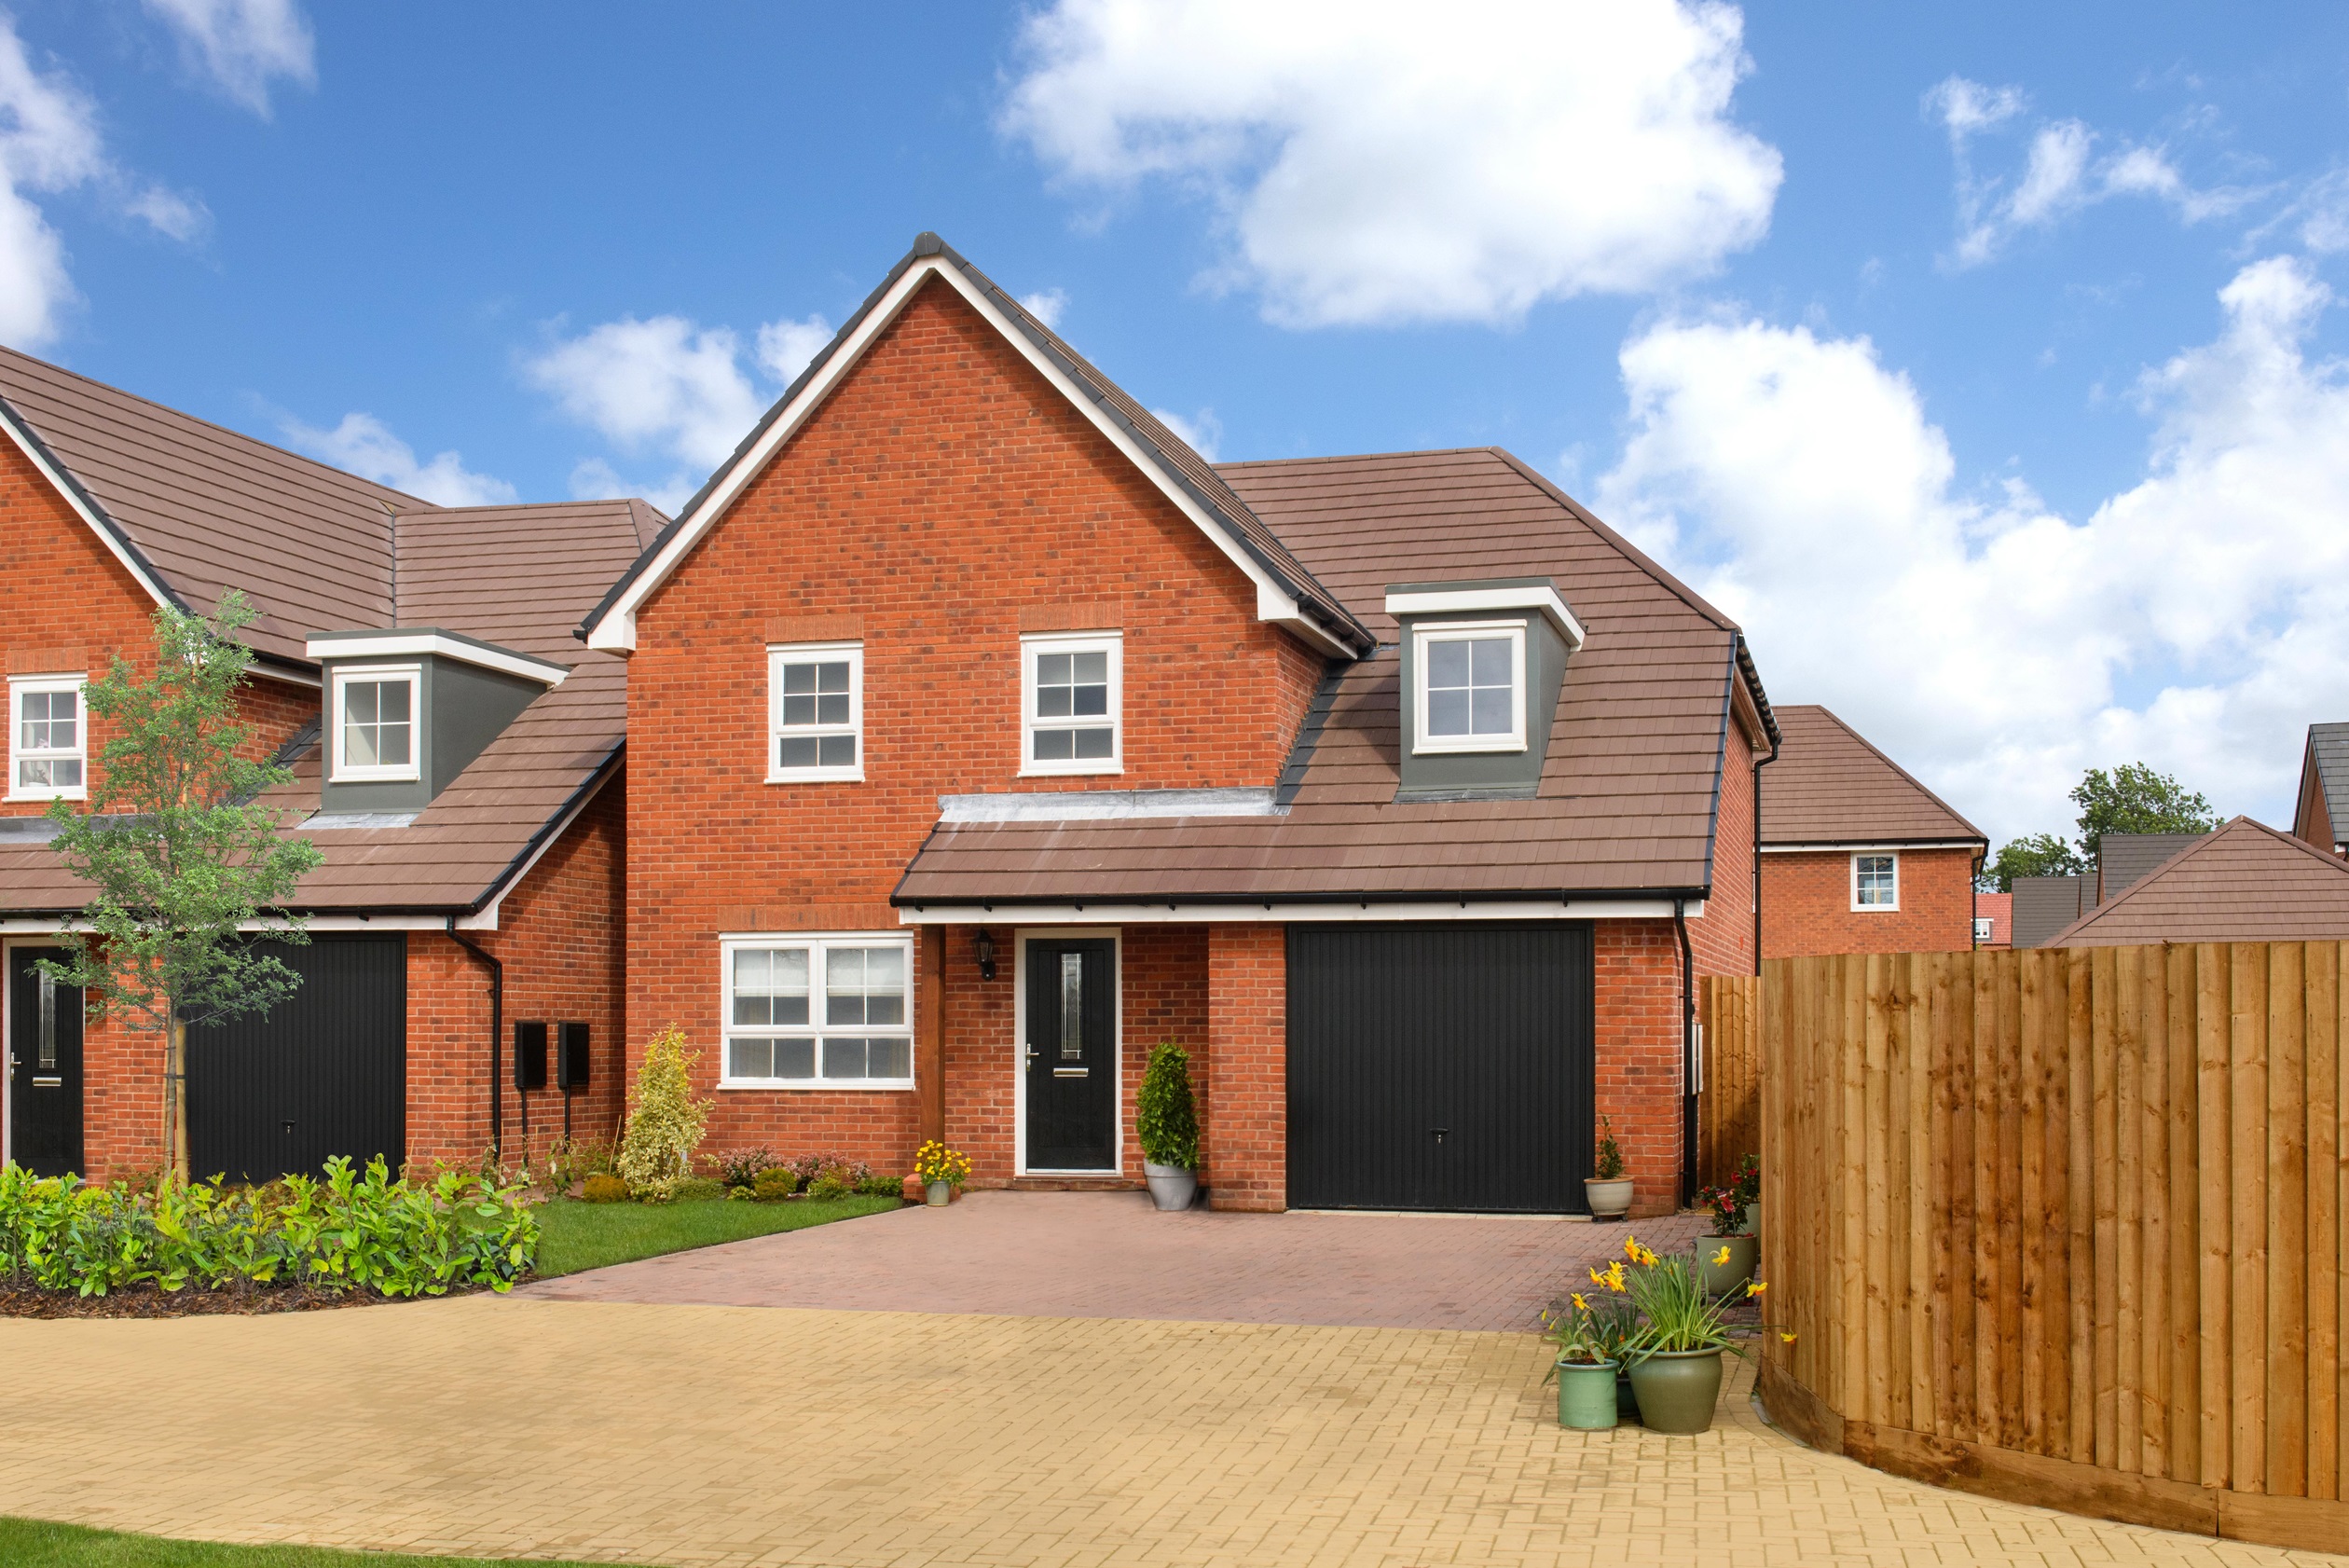 Property 1 of 10. Exterior Image Of Our 4 Bed Ashburton Home